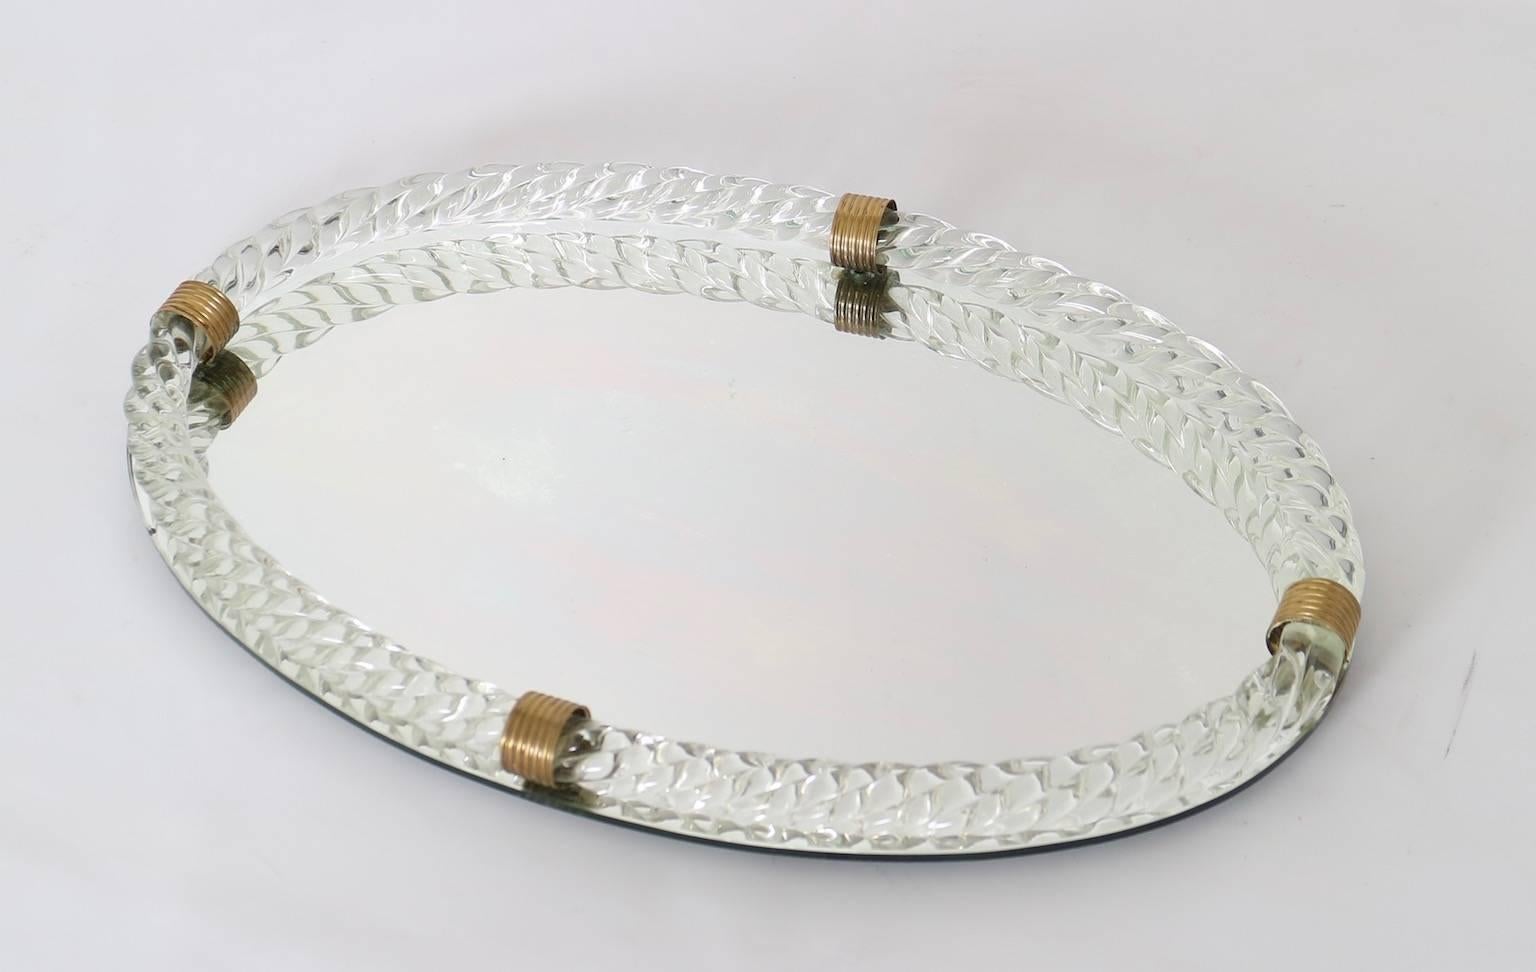 This vintage Murano vanity tray with mirror in oval form features a clear torciglione glass rope gallery with brass accents. In Very good vintage condition, with wear consistent with age and use.

110483.